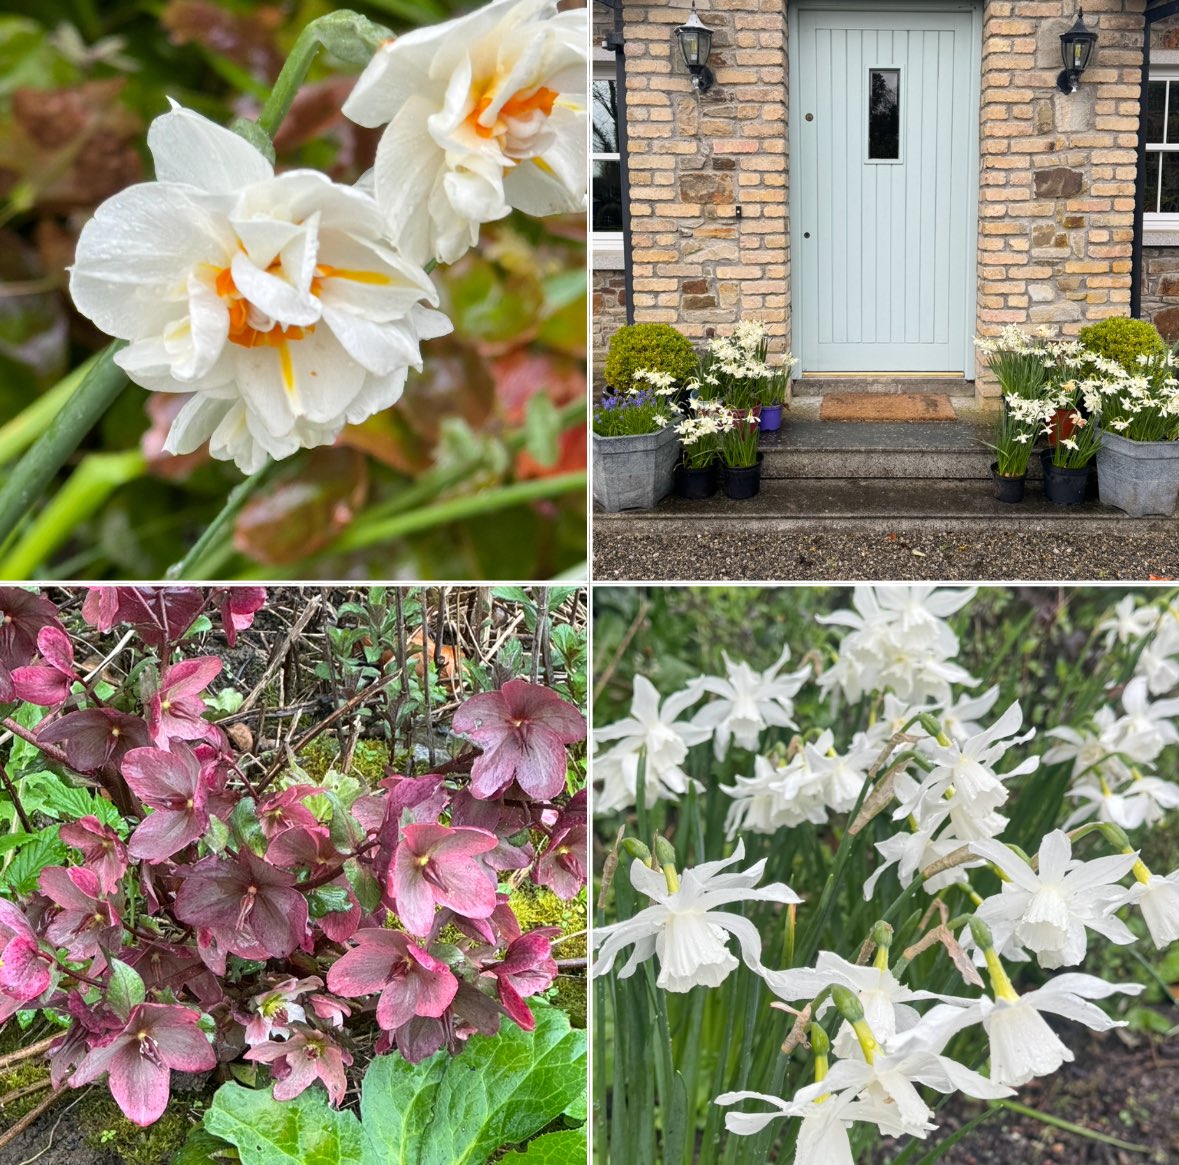 Good Evening, spring arrived here at the studio 💐 If you are looking for a little time out to learn something new, get the creative juices going - our spring oil painting programme is now on our website. #localbusiness #artschool #Wednesday #GardeningX